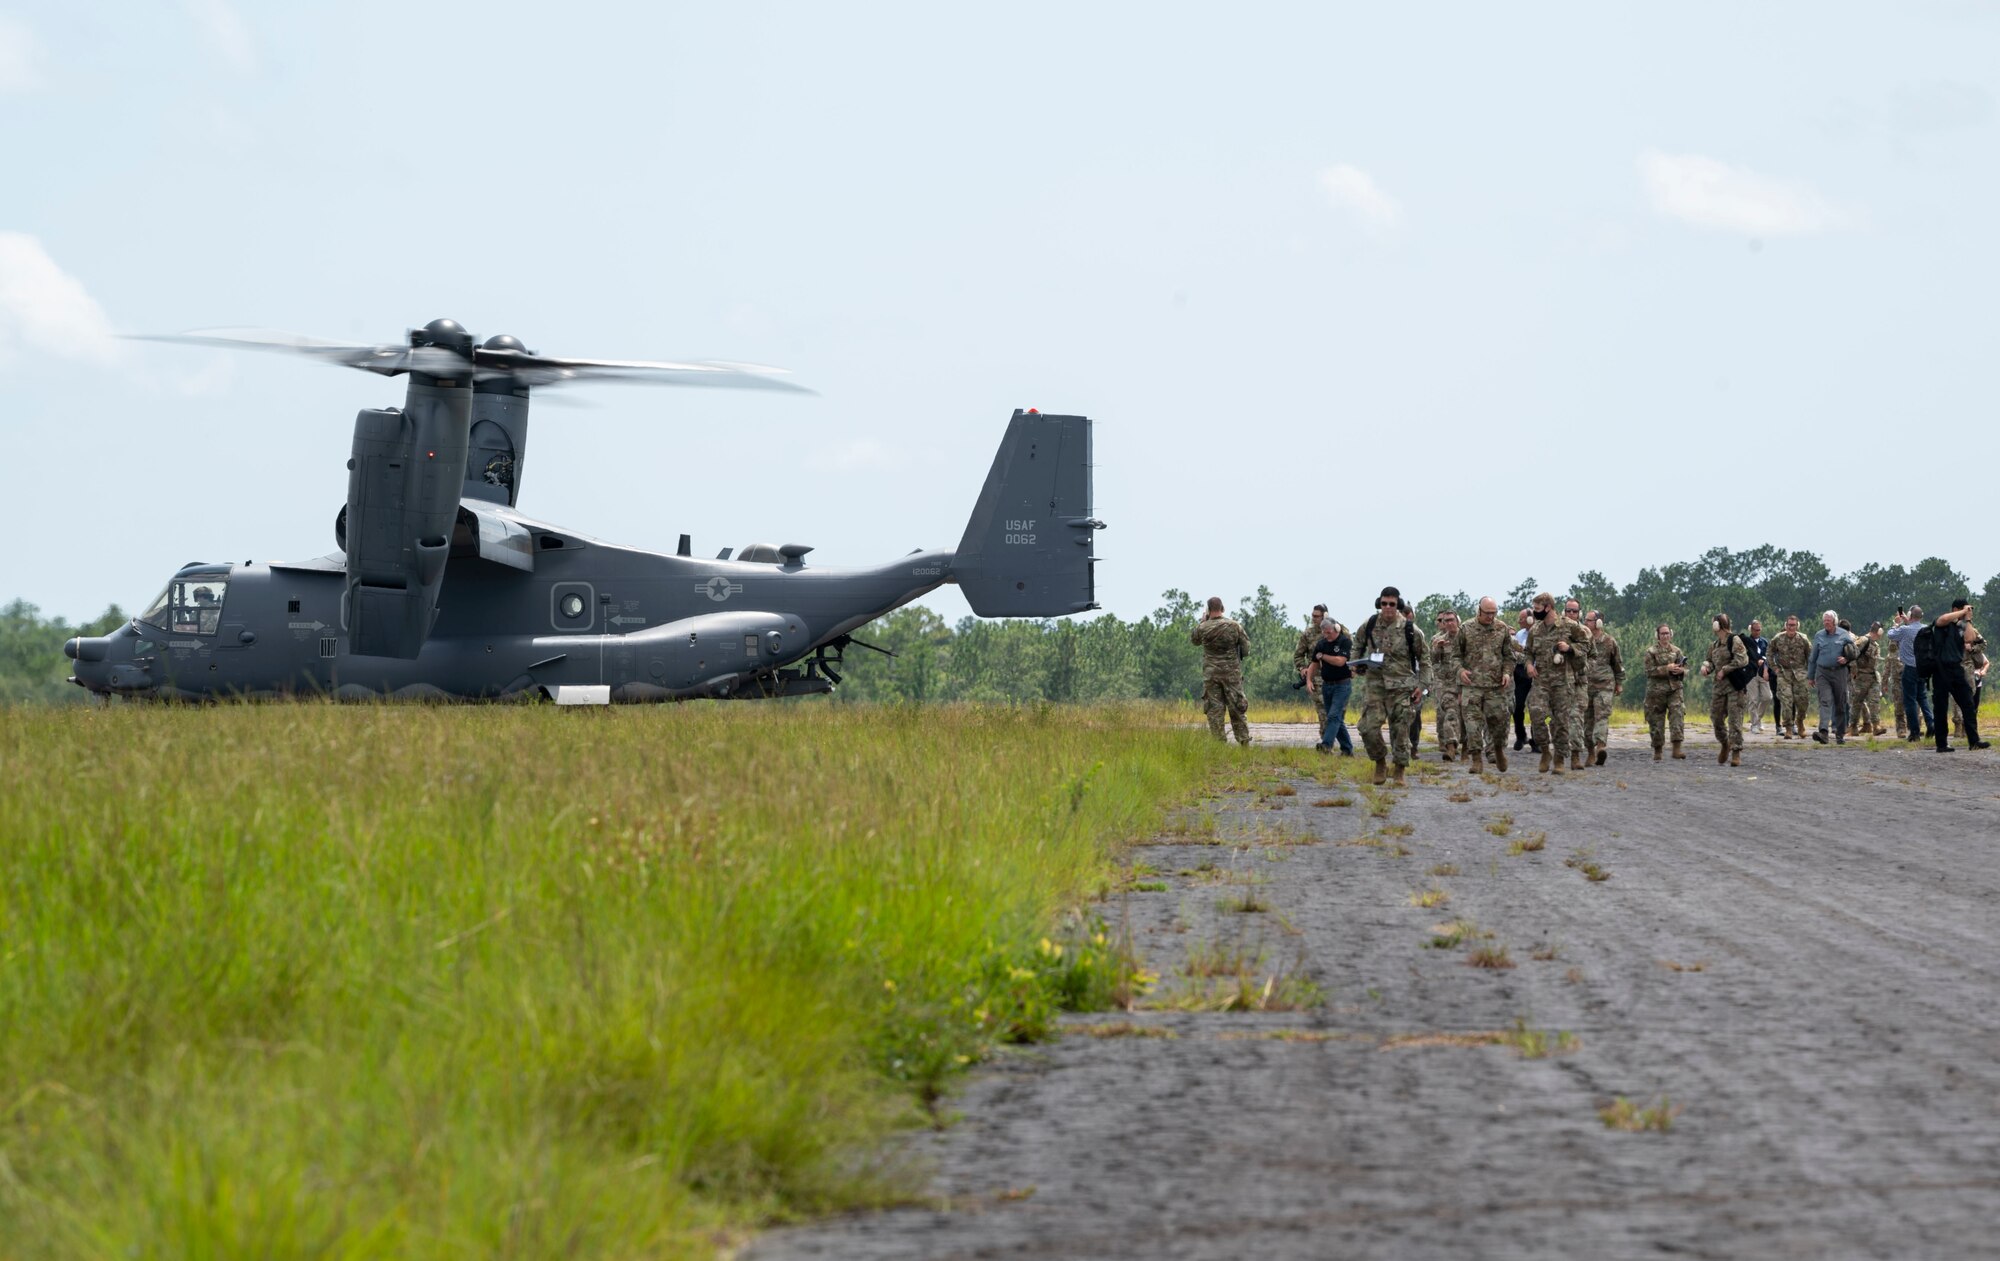 U.S. Air Force Gen. Arnold Bunch, commander of Air Force Material Command, U.S. Air Force Lt. Gen. Jim Slife, commander of Air Force Special Operations Command, and other AFMC and AFSOC senior leaders, disembark from a CV-22 Osprey at Austere Field #6, Florida, July 21, 2021.